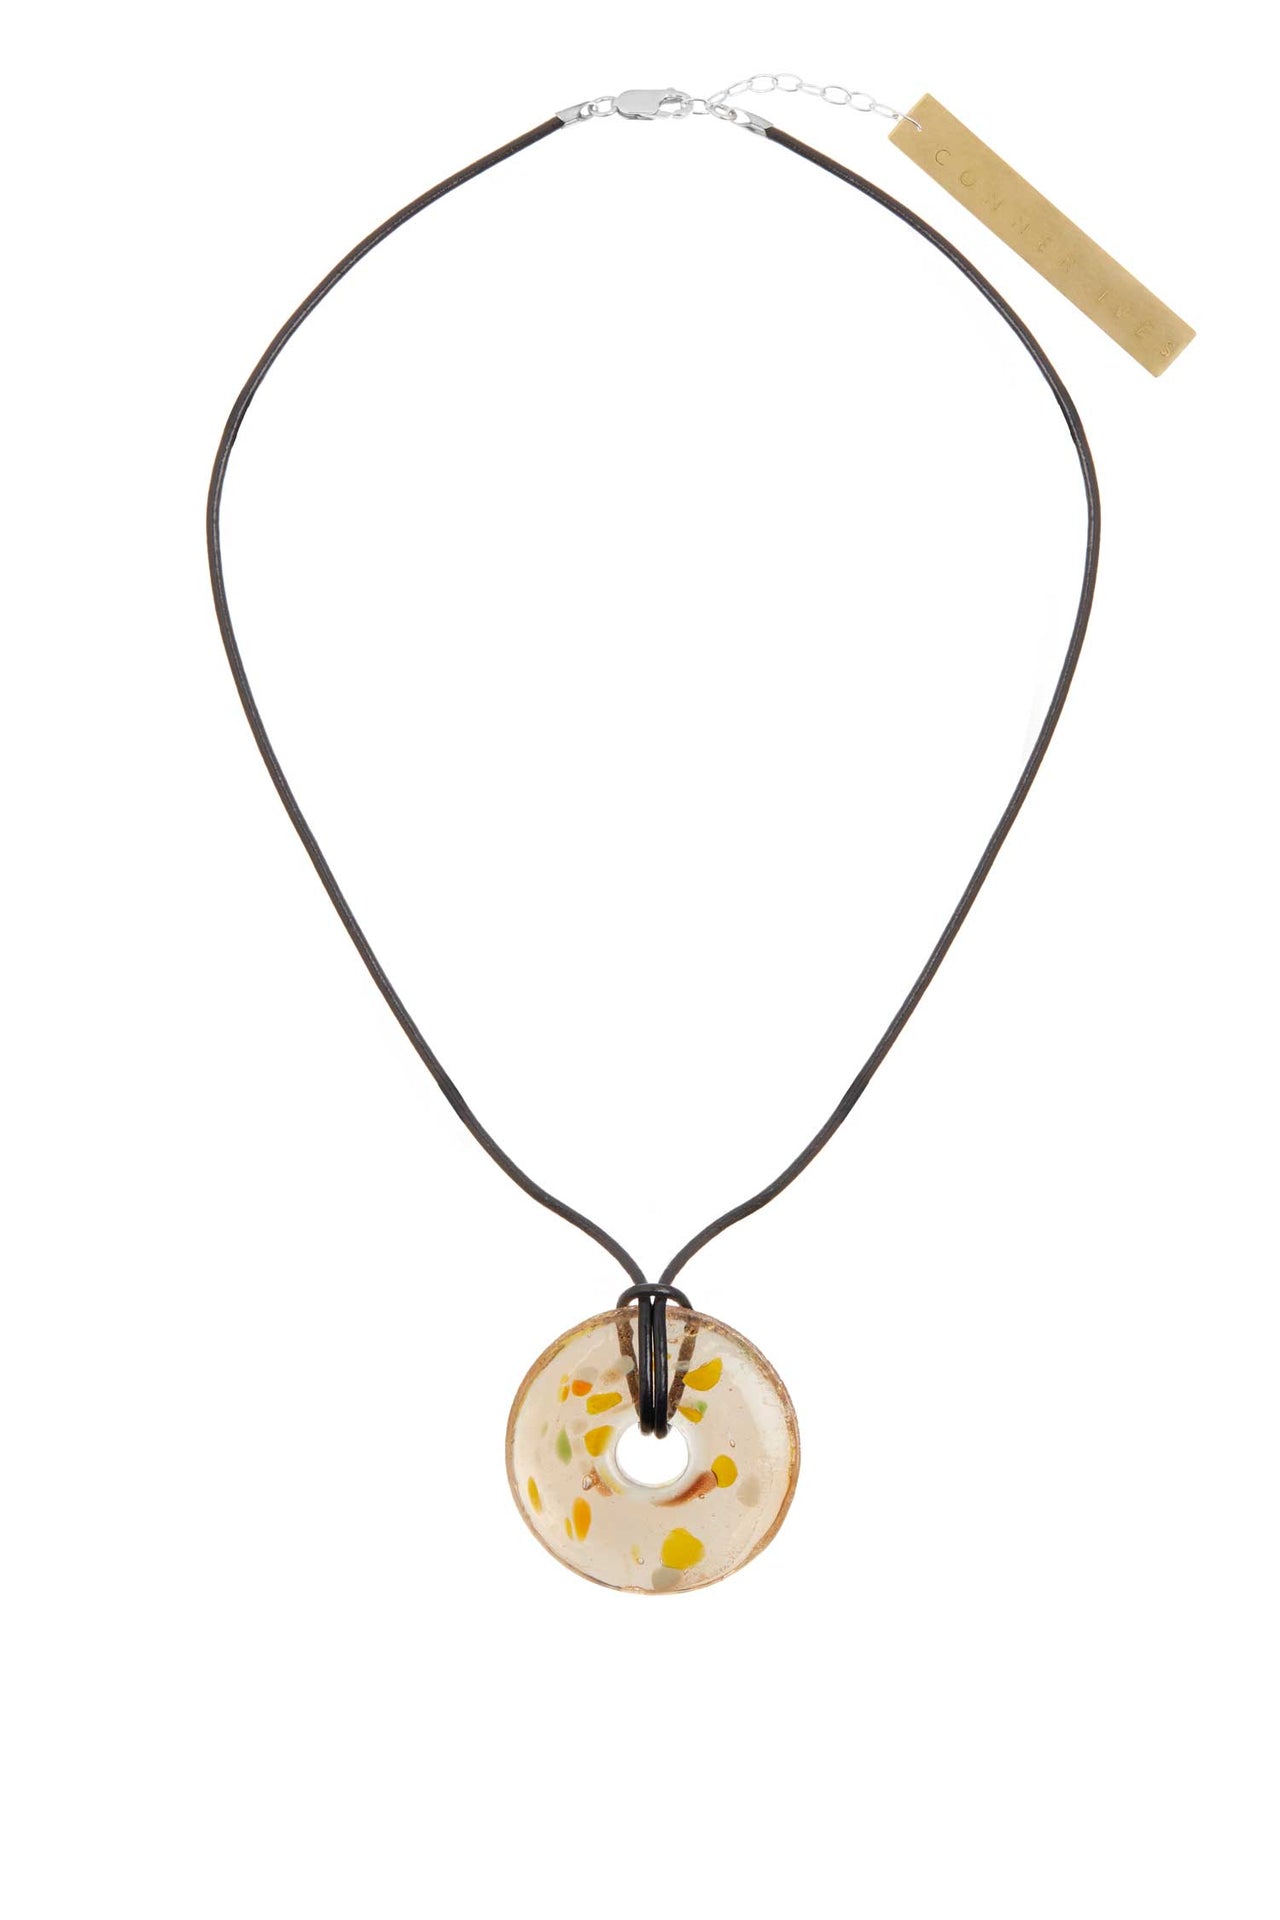 The Murano Glass Pendant Necklace — Speckled Buoy